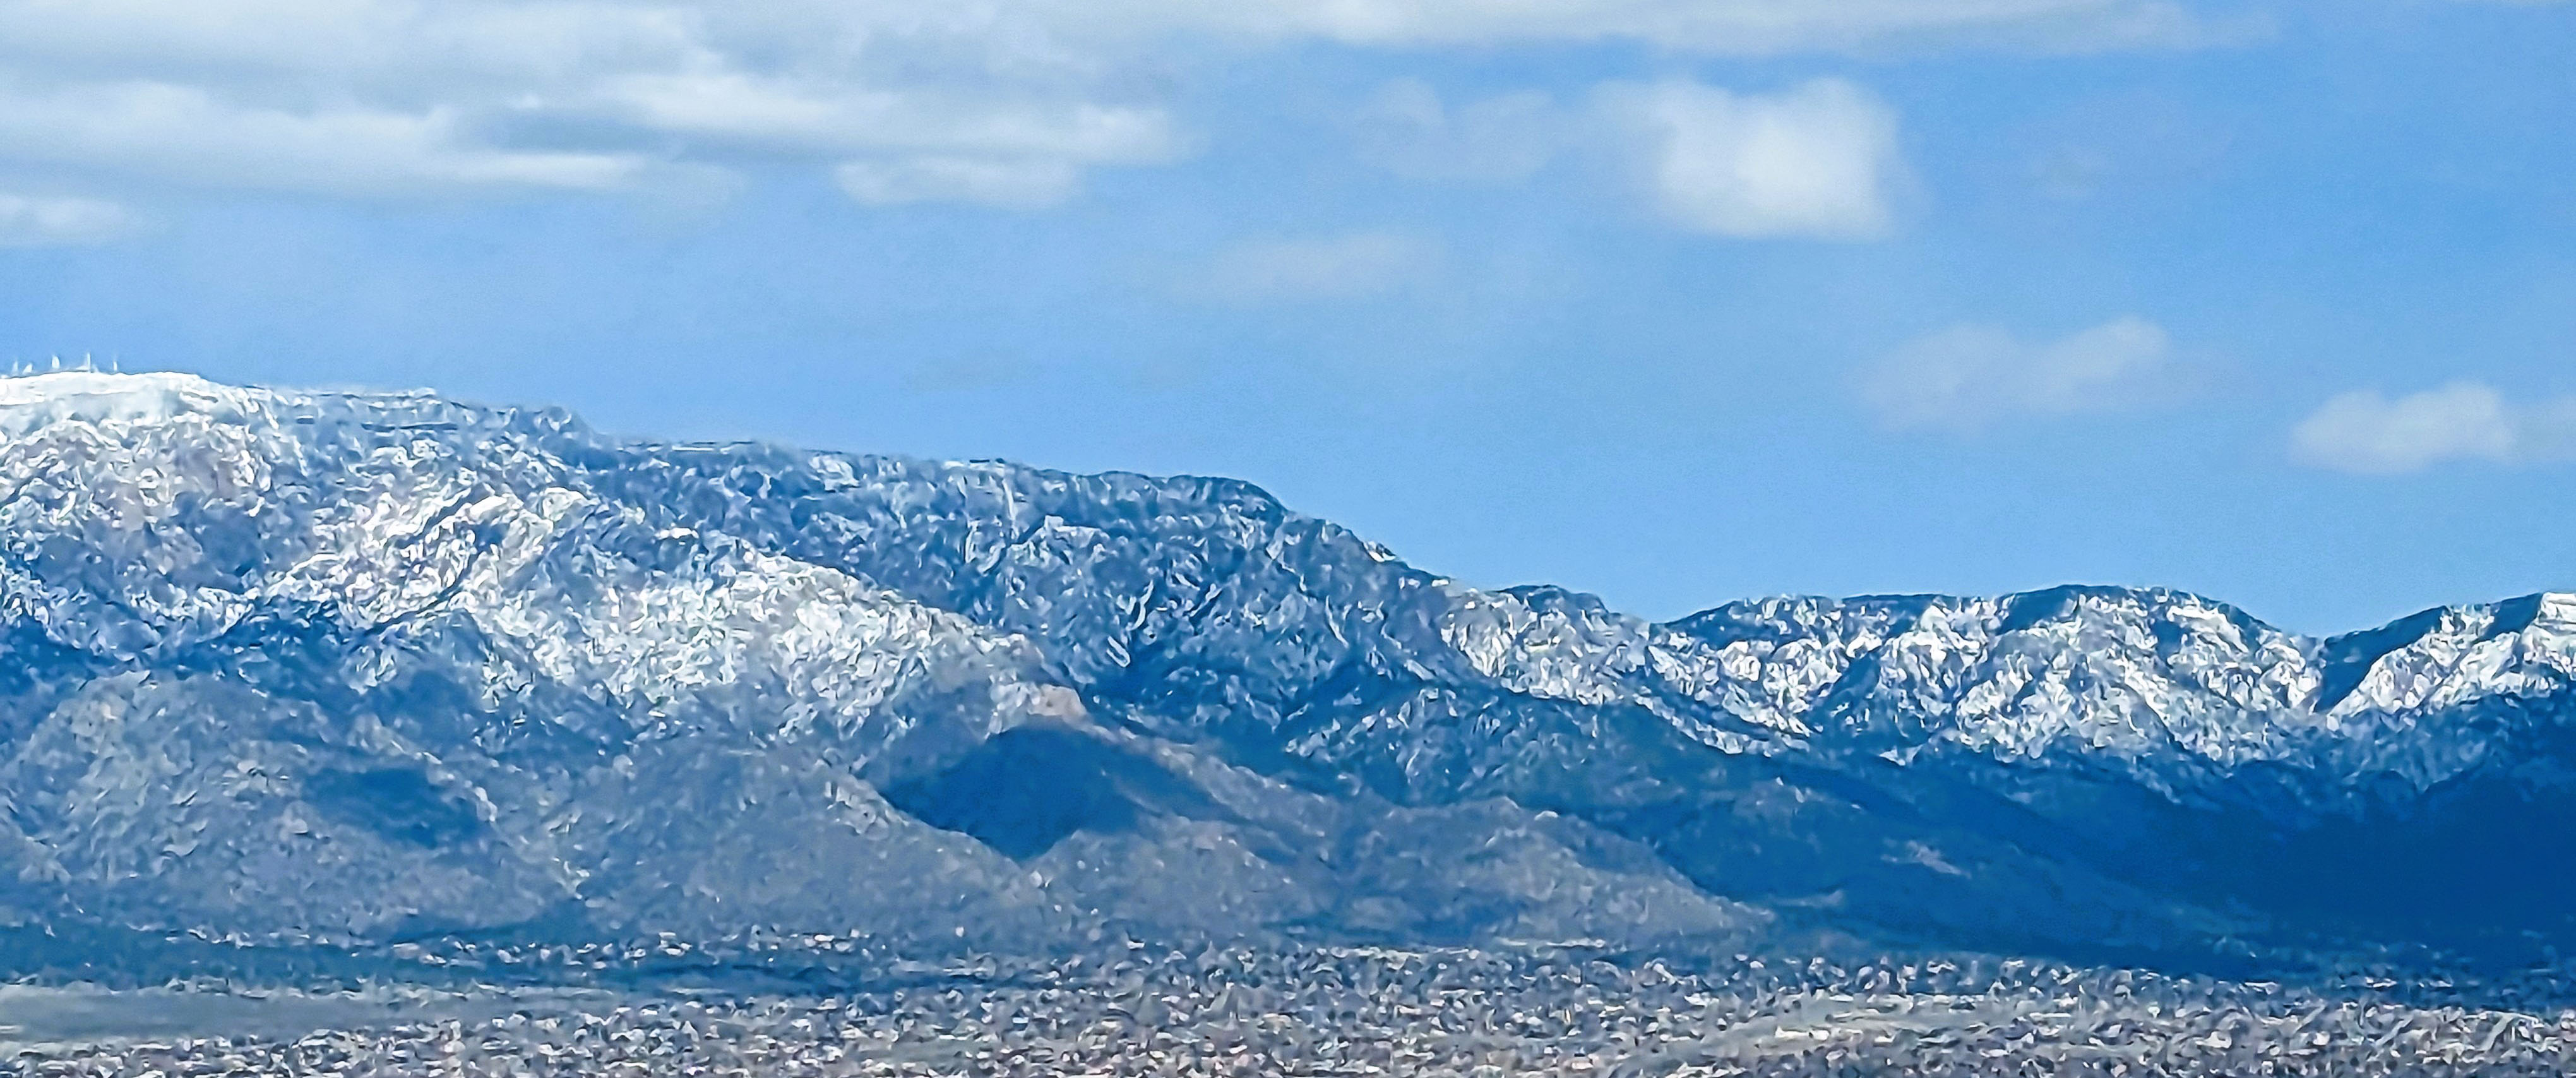  Mountains in the Distance in Albuquerque, NM